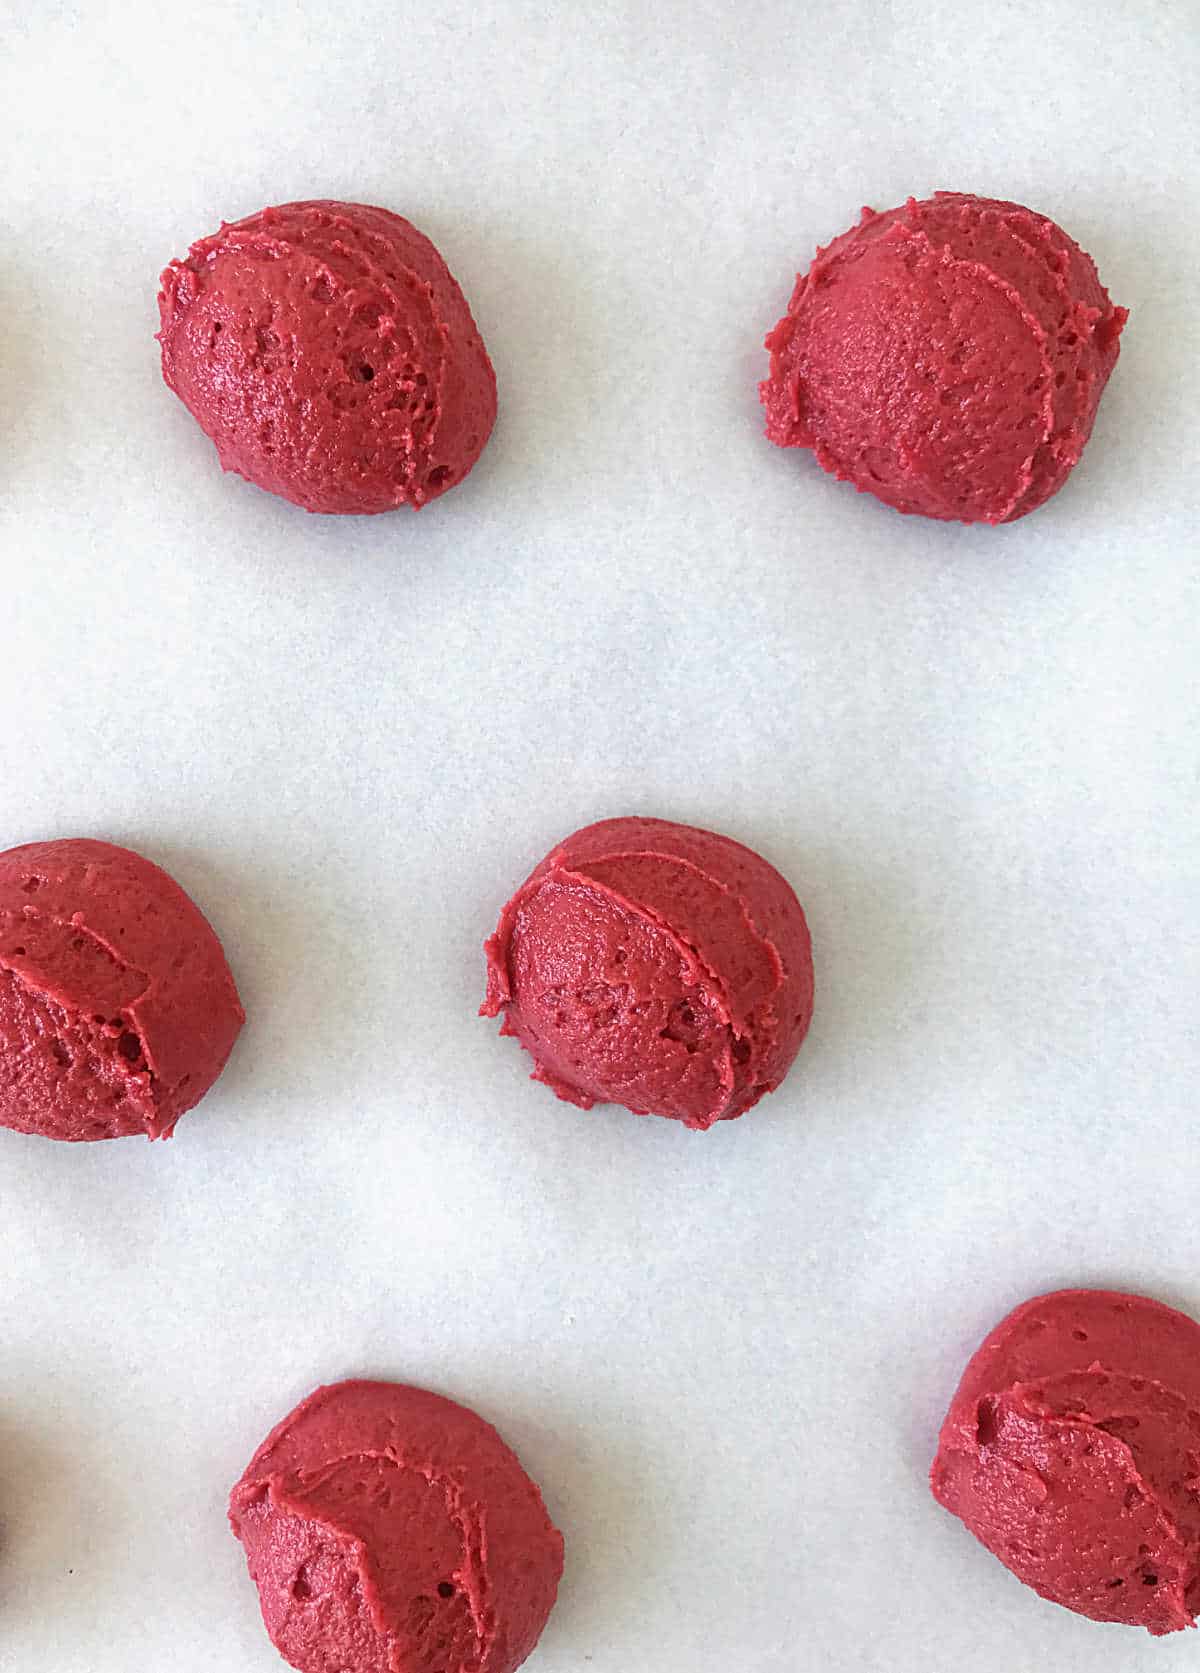 Mounds of red velvet whoopie pie batter on parchment paper ready to be baked